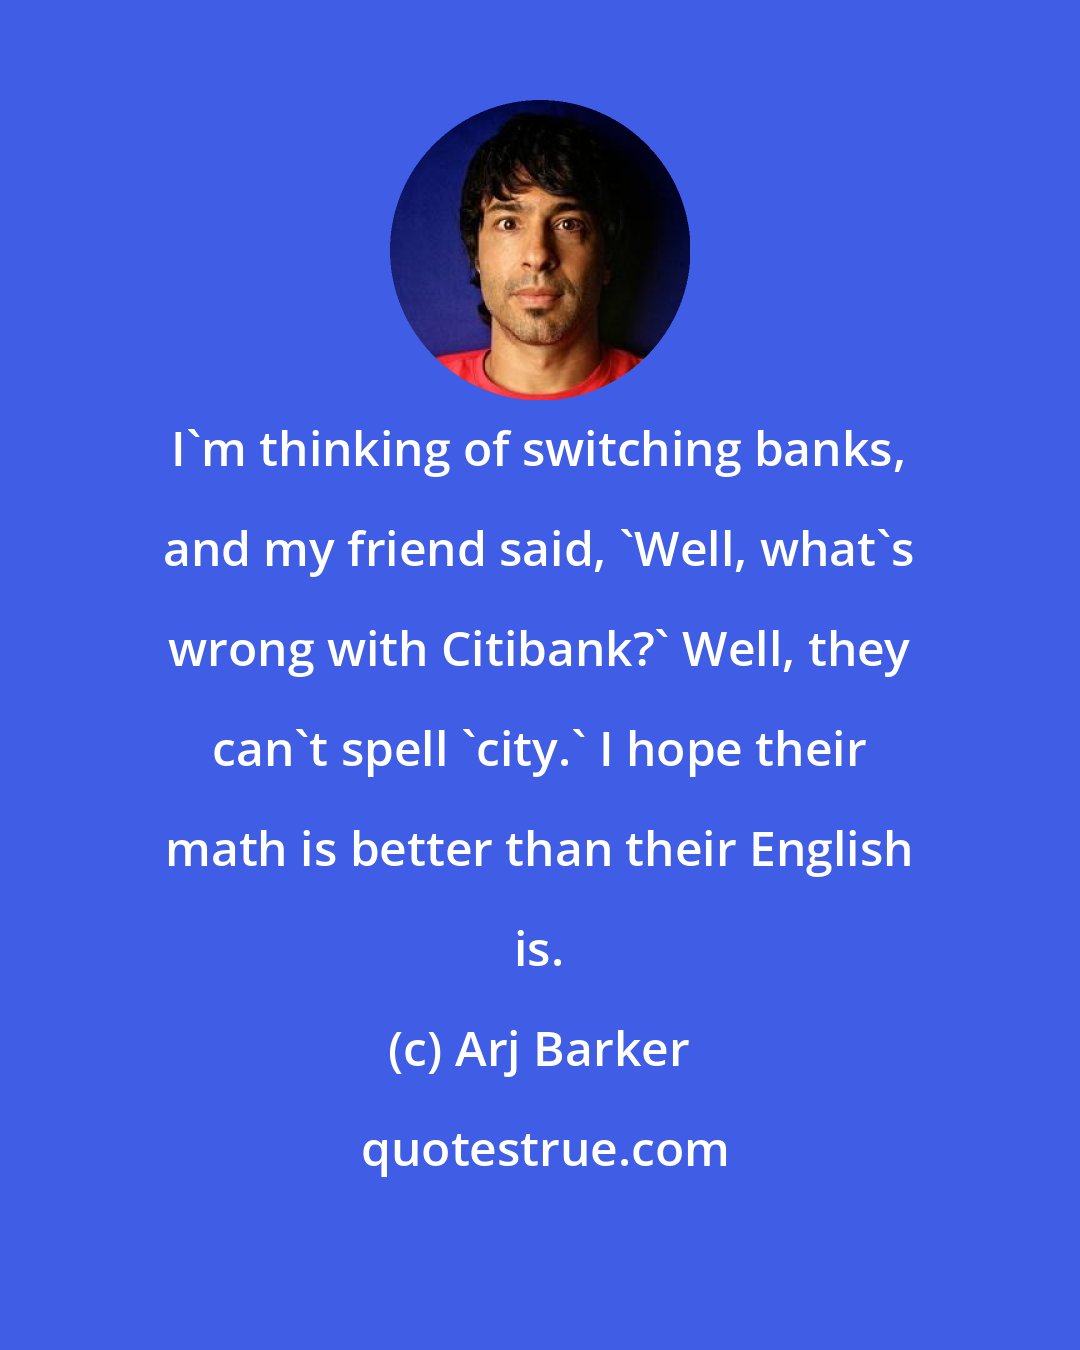 Arj Barker: I'm thinking of switching banks, and my friend said, 'Well, what's wrong with Citibank?' Well, they can't spell 'city.' I hope their math is better than their English is.